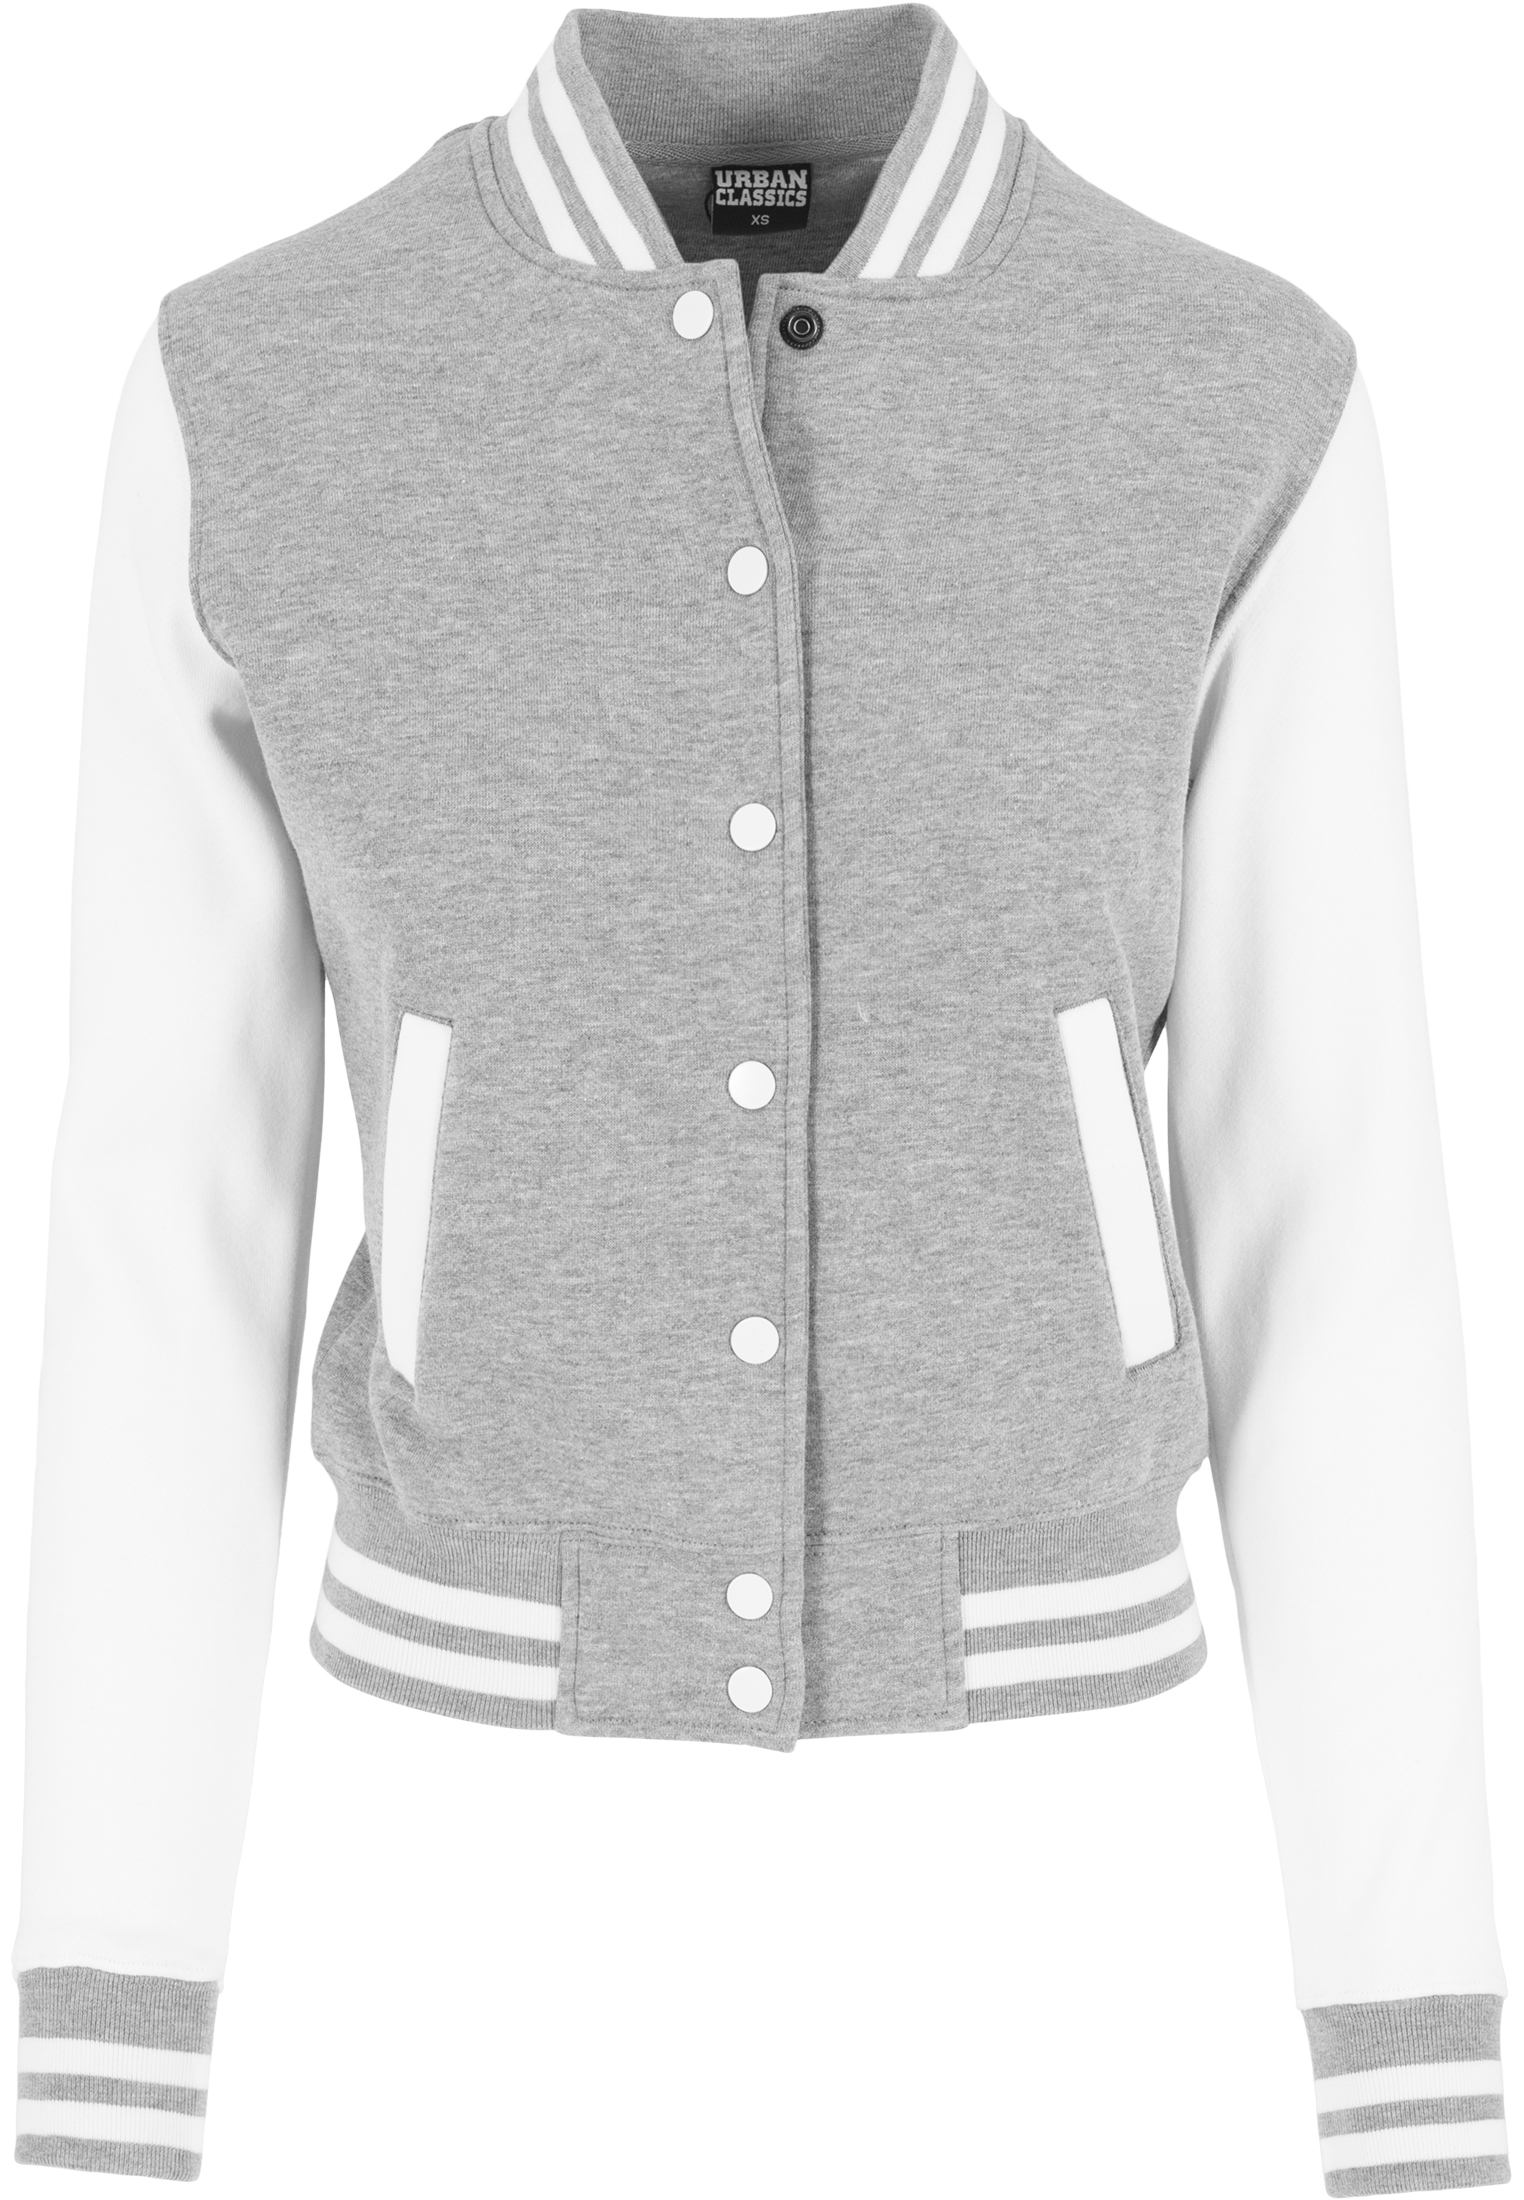 College Jacken Ladies 2-tone College Sweatjacket in Farbe gry/wht